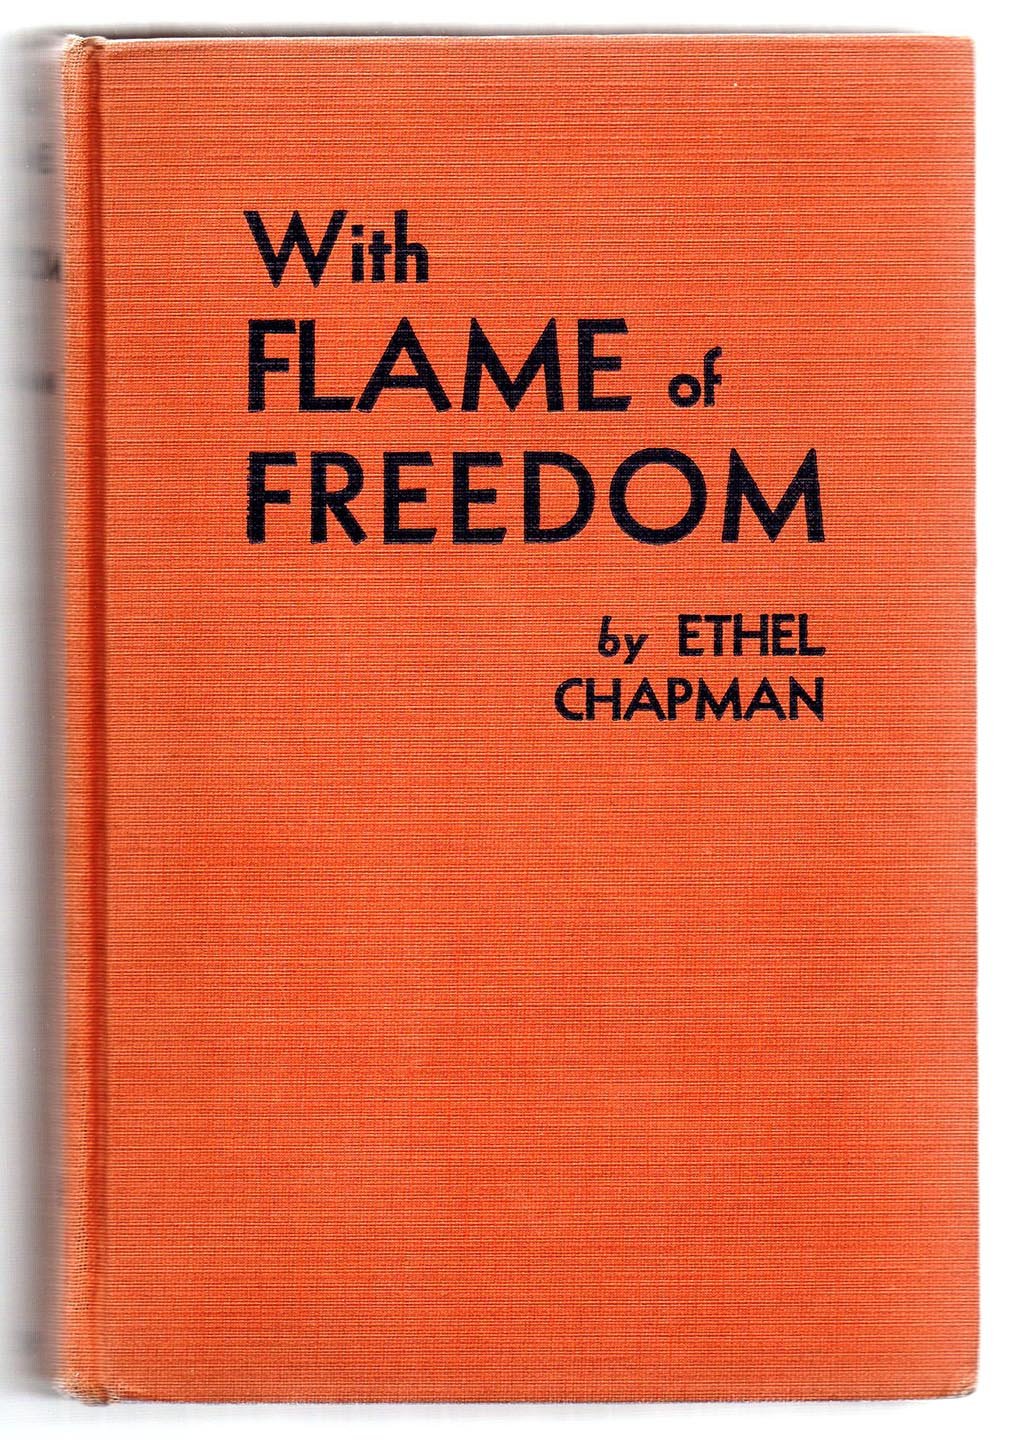 With Flame of Freedom